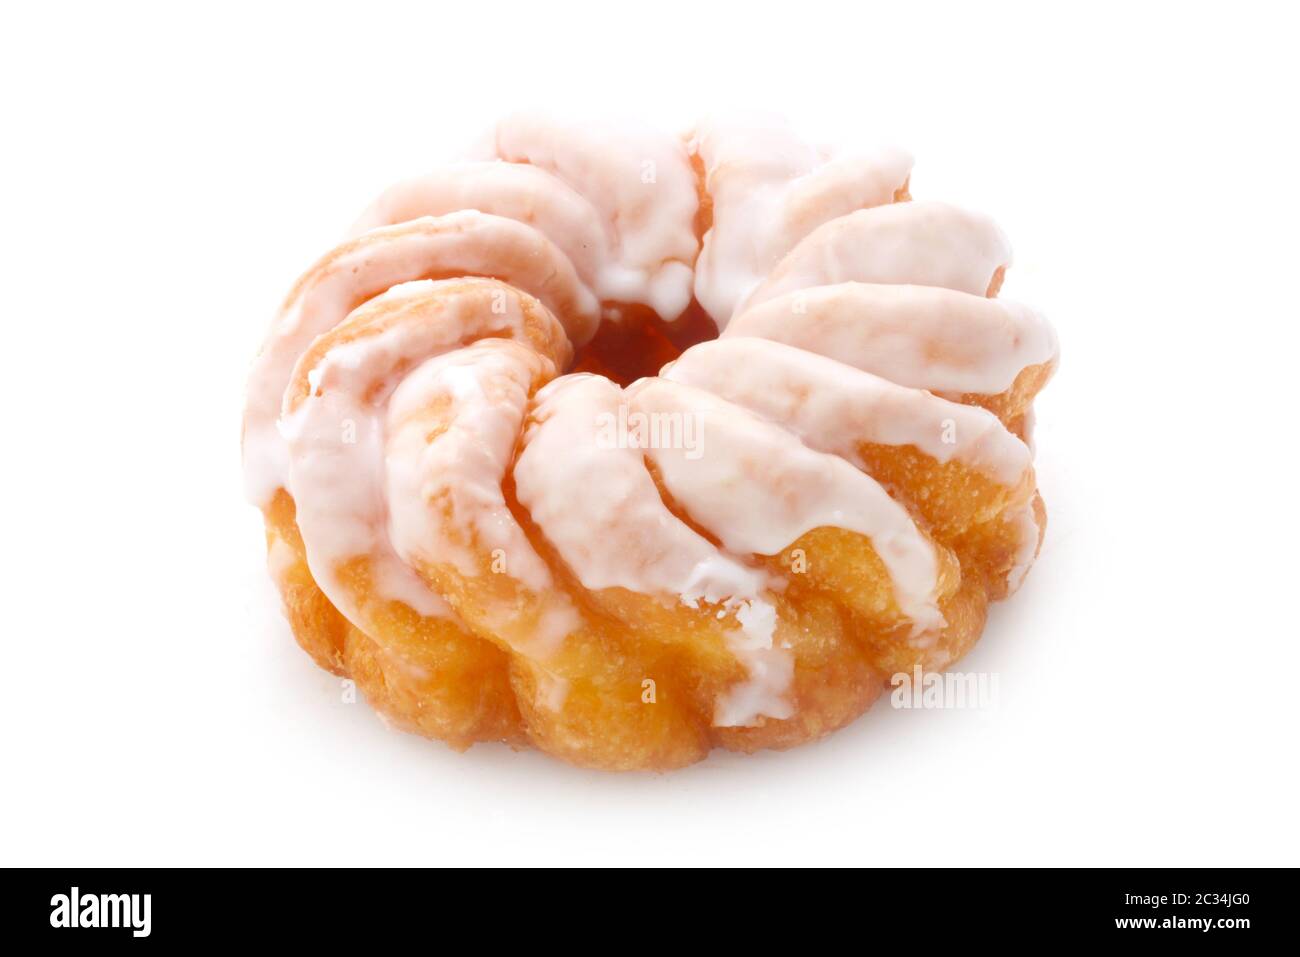 french cruller donut shop with